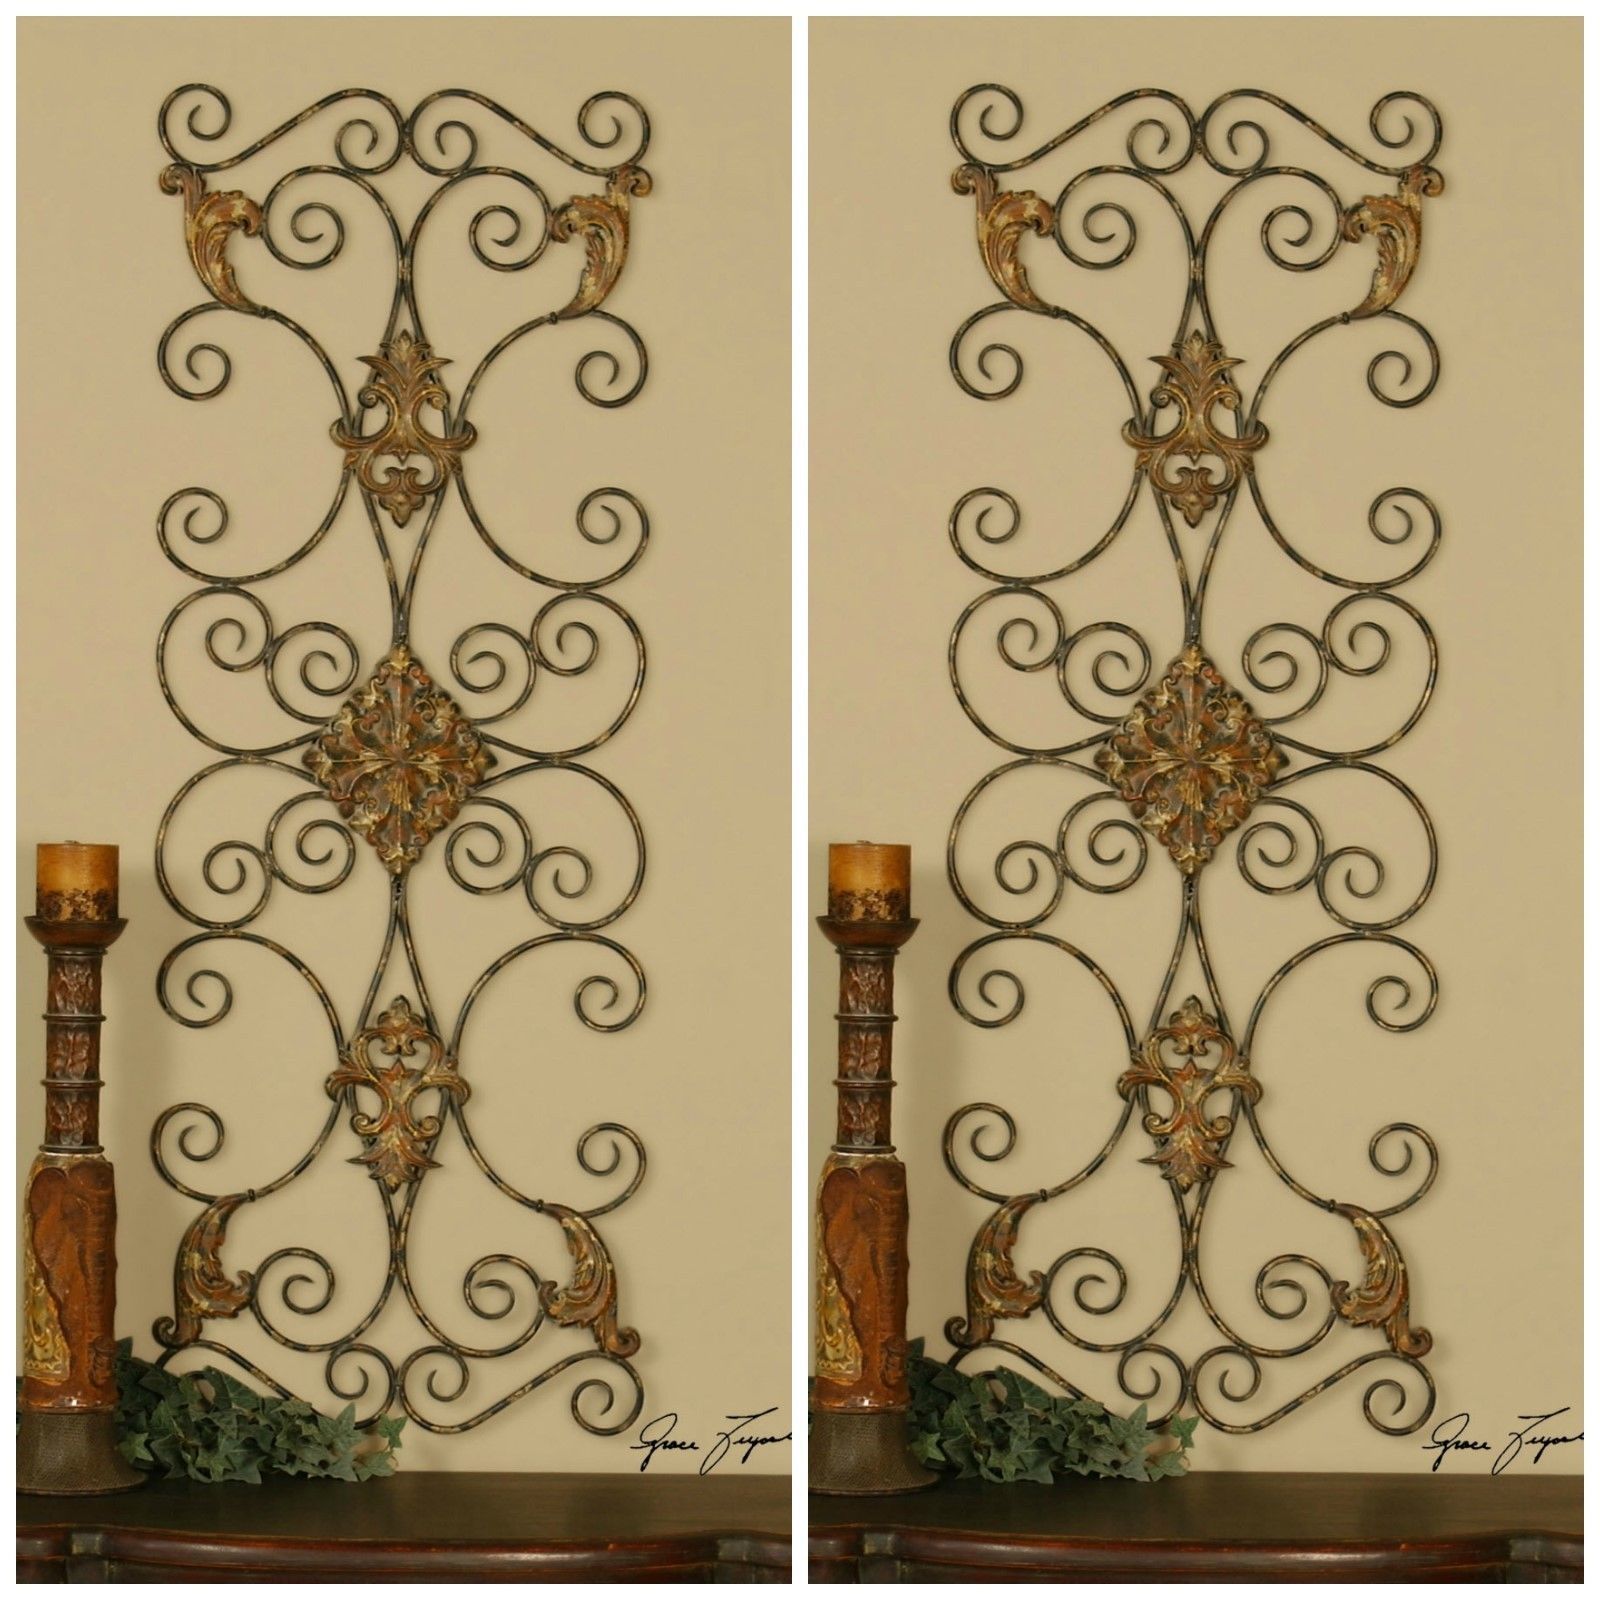 Wrought Iron And Mosaic: Detailing In Mediterranean Home Decor